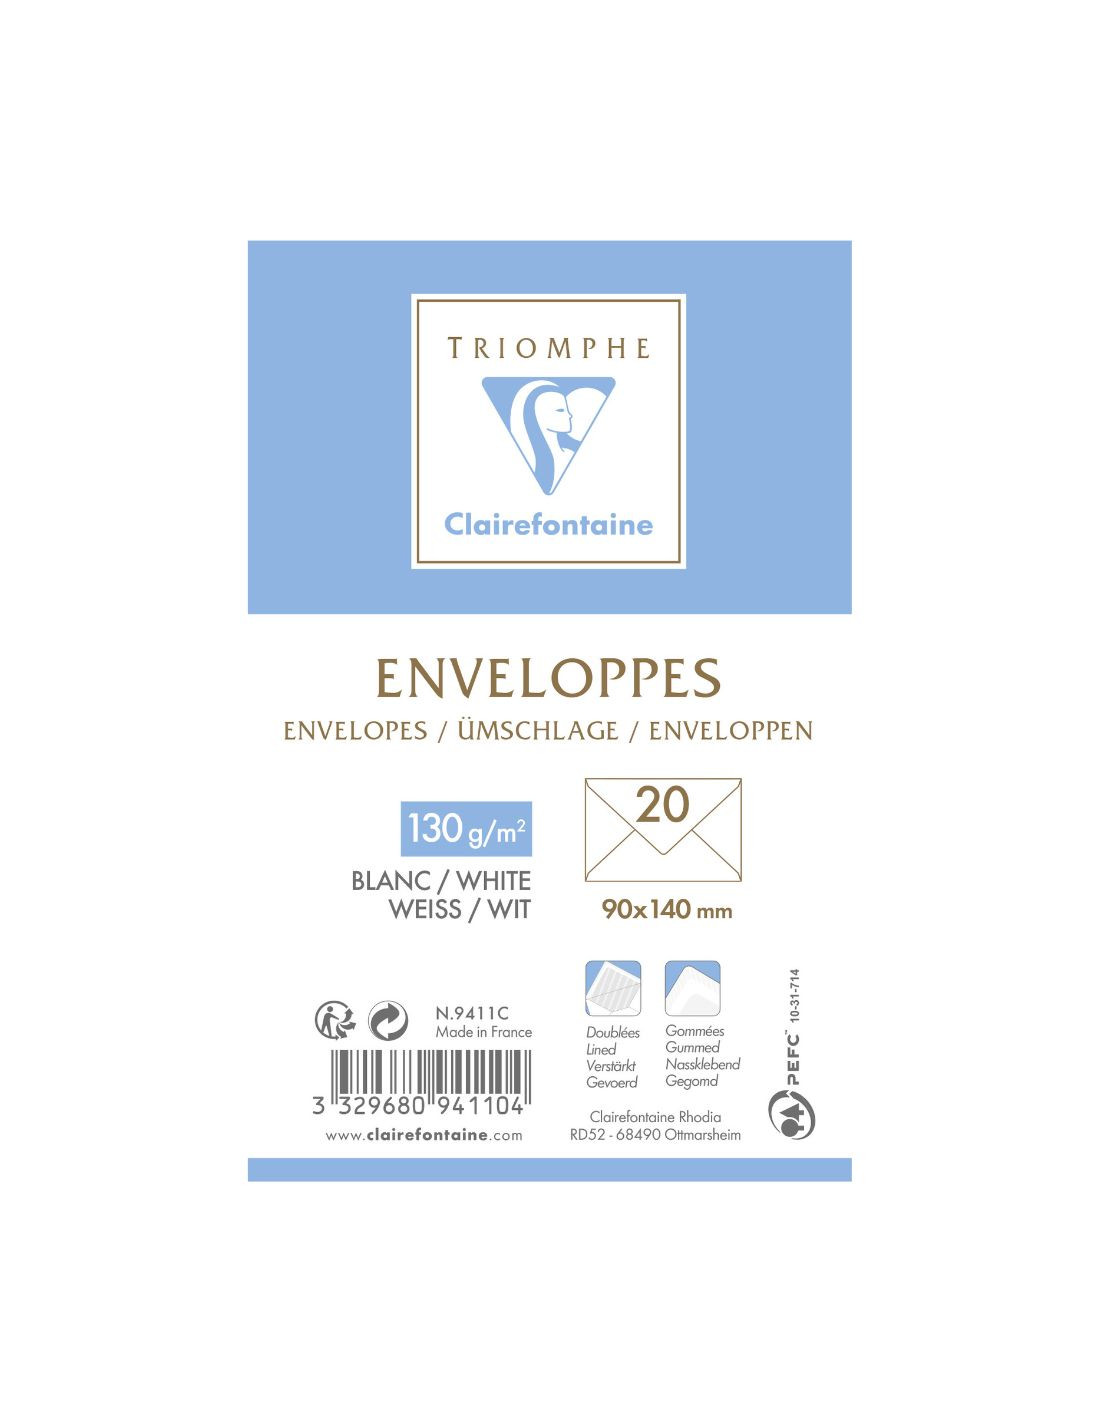 Triomphe - 20 envelopes for calling card - Clairefontaine